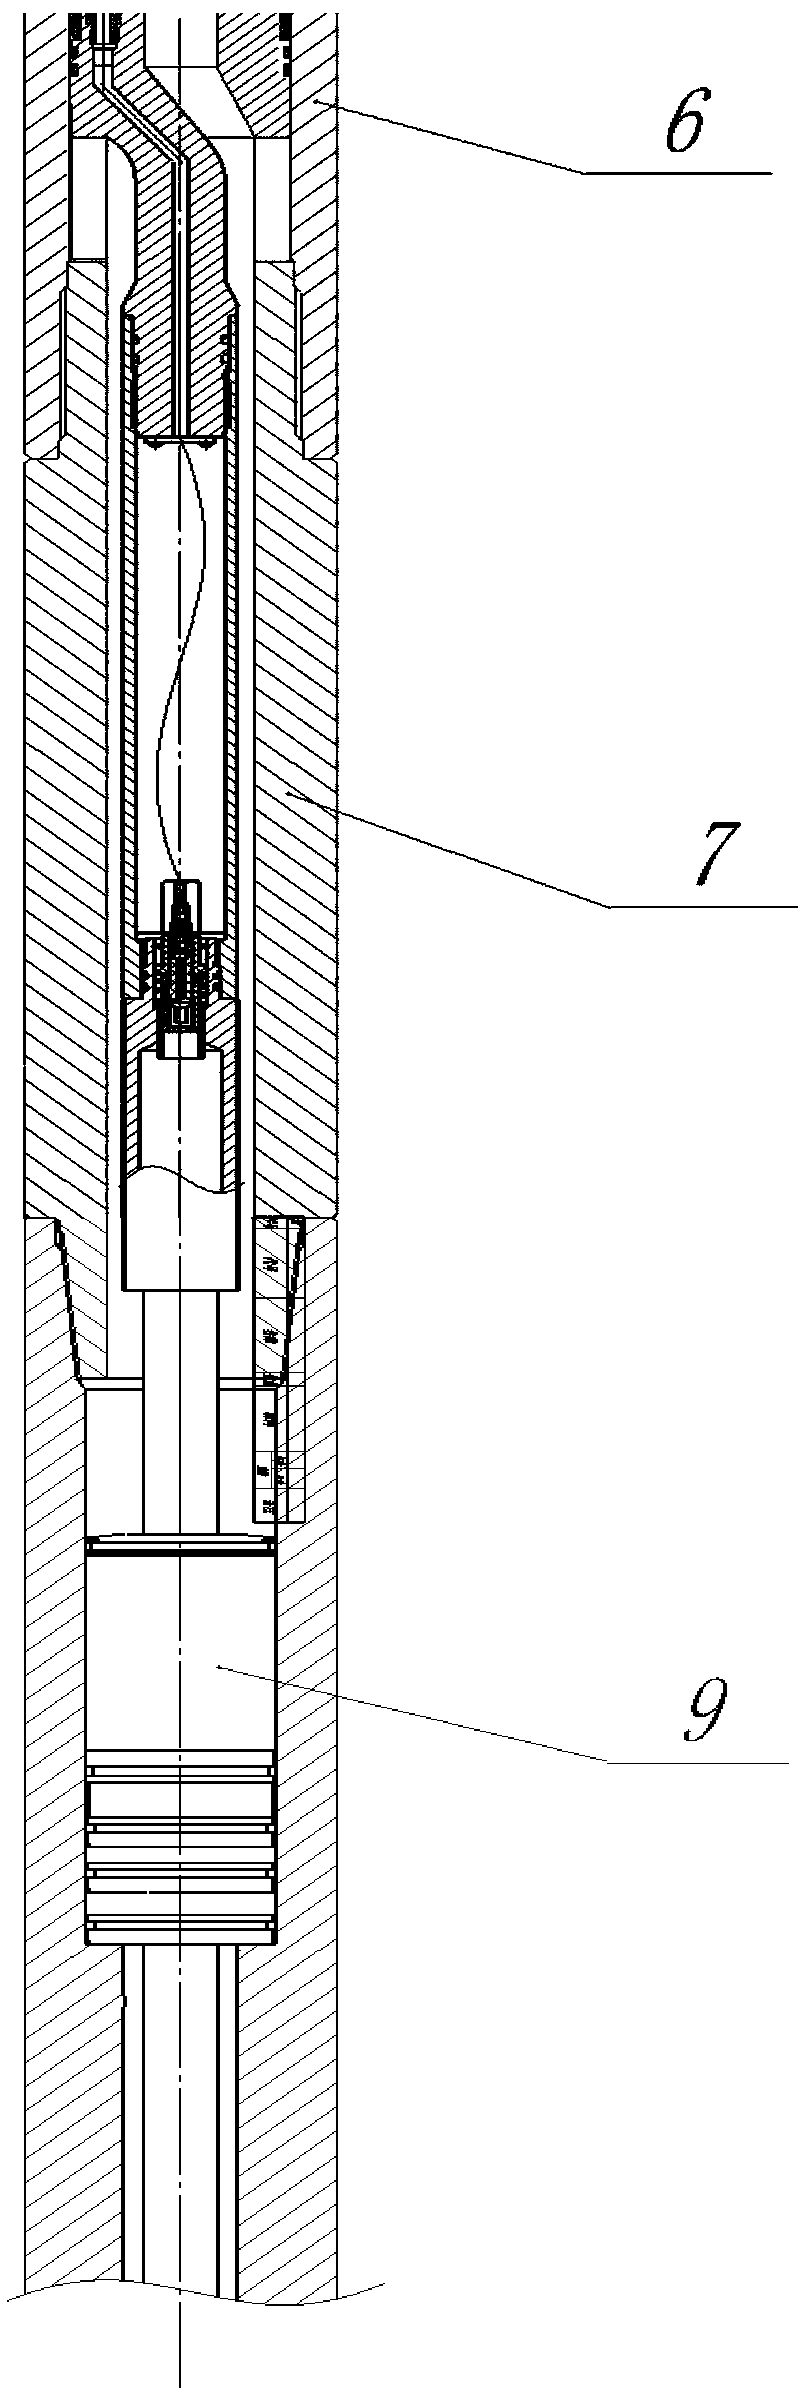 Measurement while drilling device